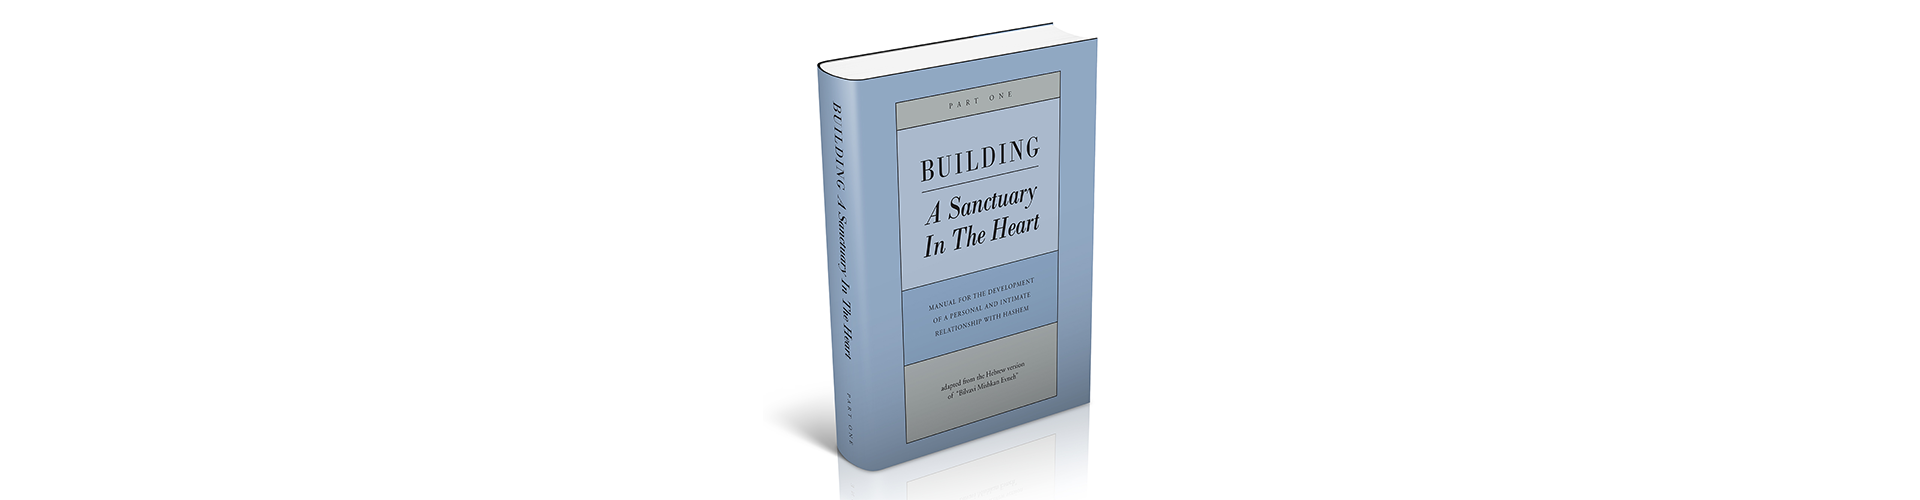 Building a Sanctuary in the Heart  Part 1 Text Online